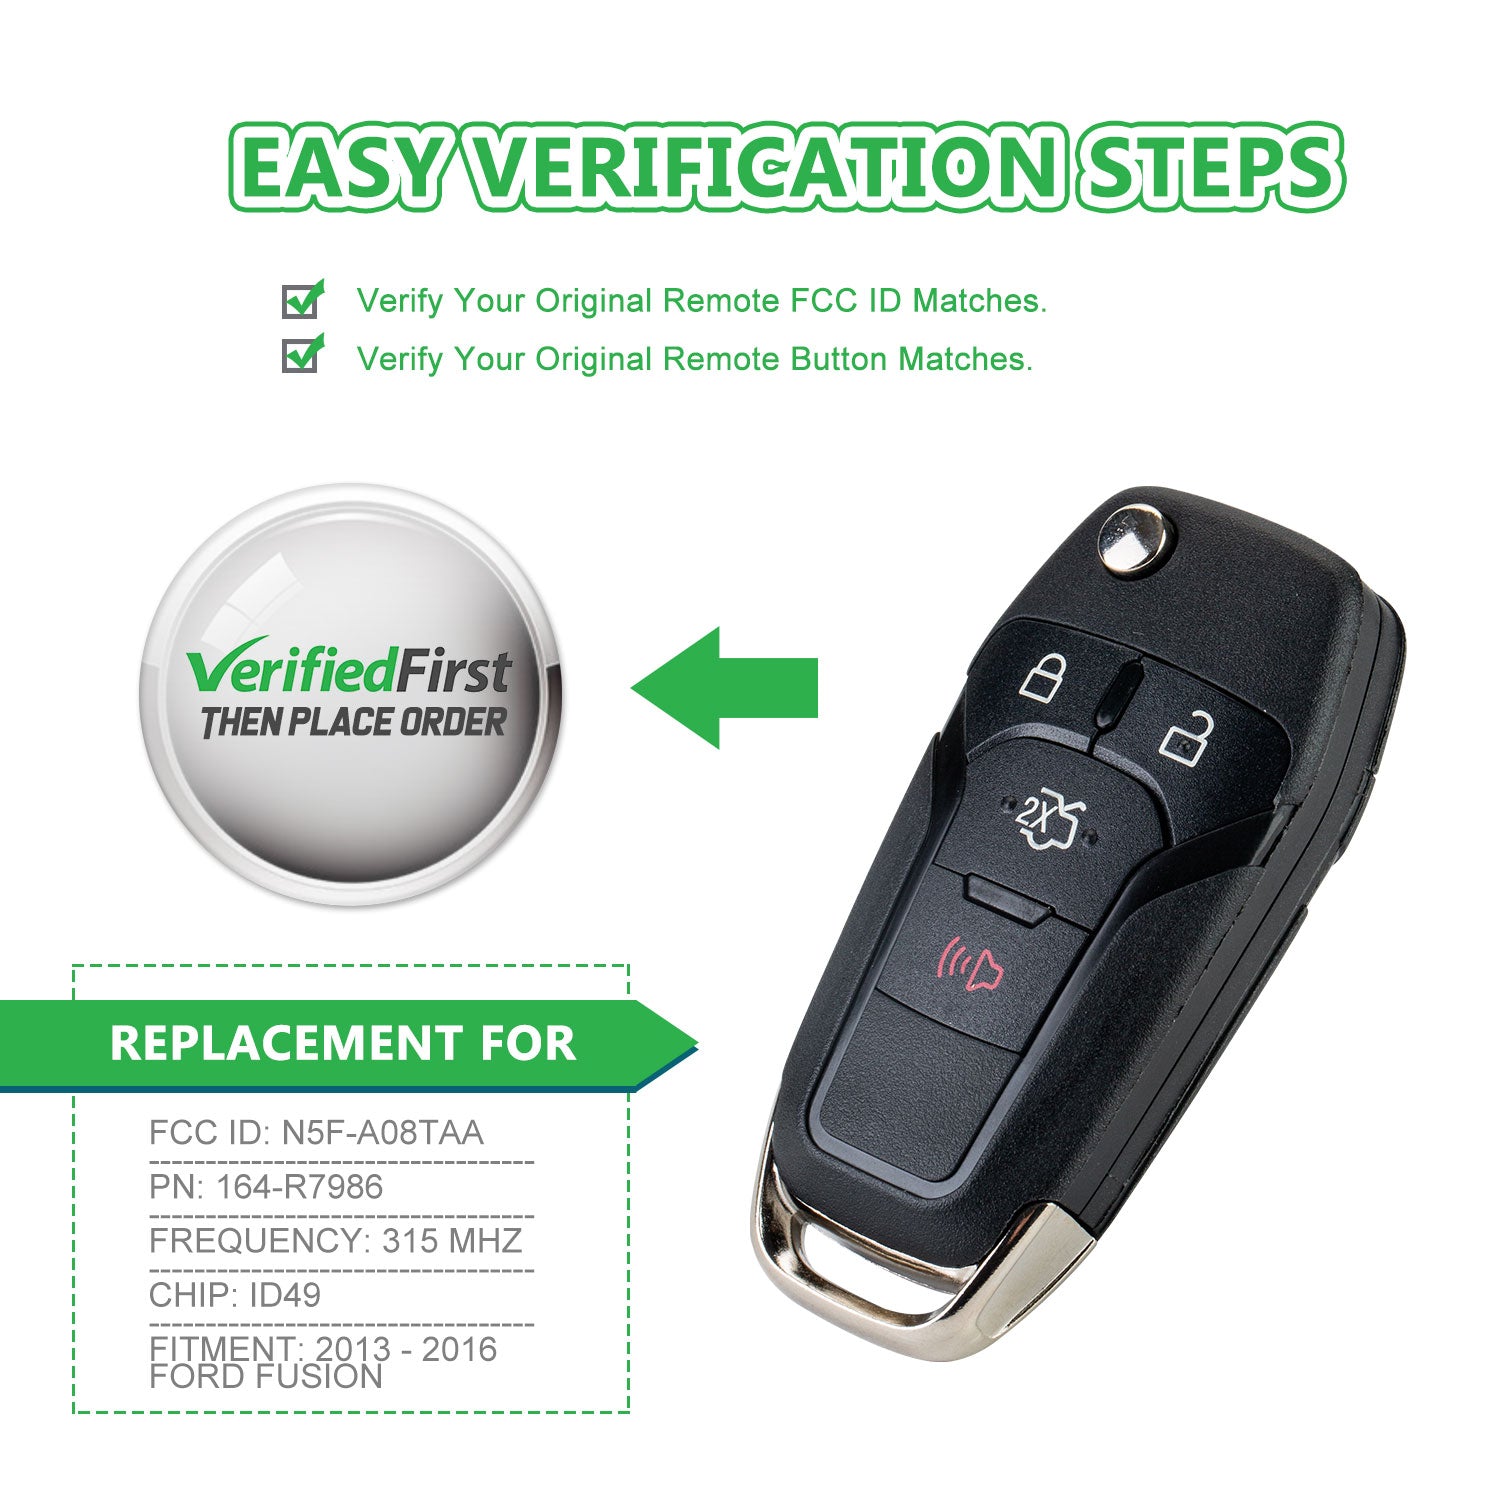 Lots of 10 Extra-Partss Remote Car Key Fob Replacement for Ford N5F-A08TAA fits 2013 2014 2015 2016 Fusion